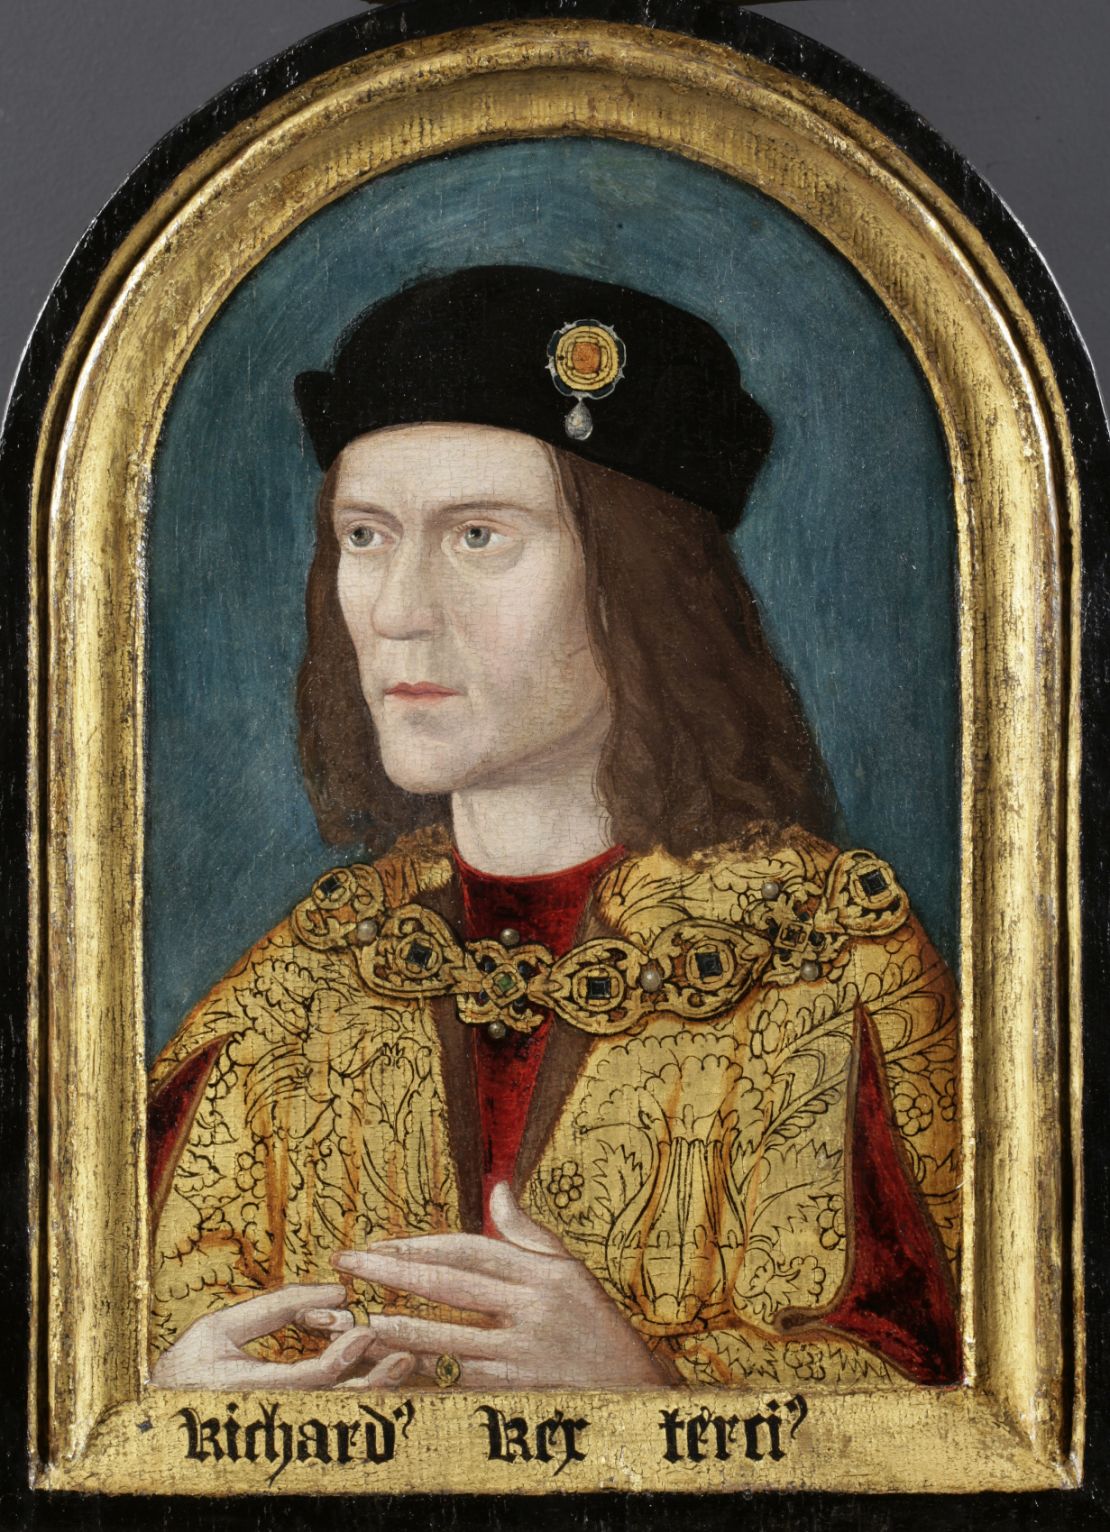 Tests suggest Richard III had blue eyes and -- at least as a child -- blond hair; this portrait is likely to be most accurate.